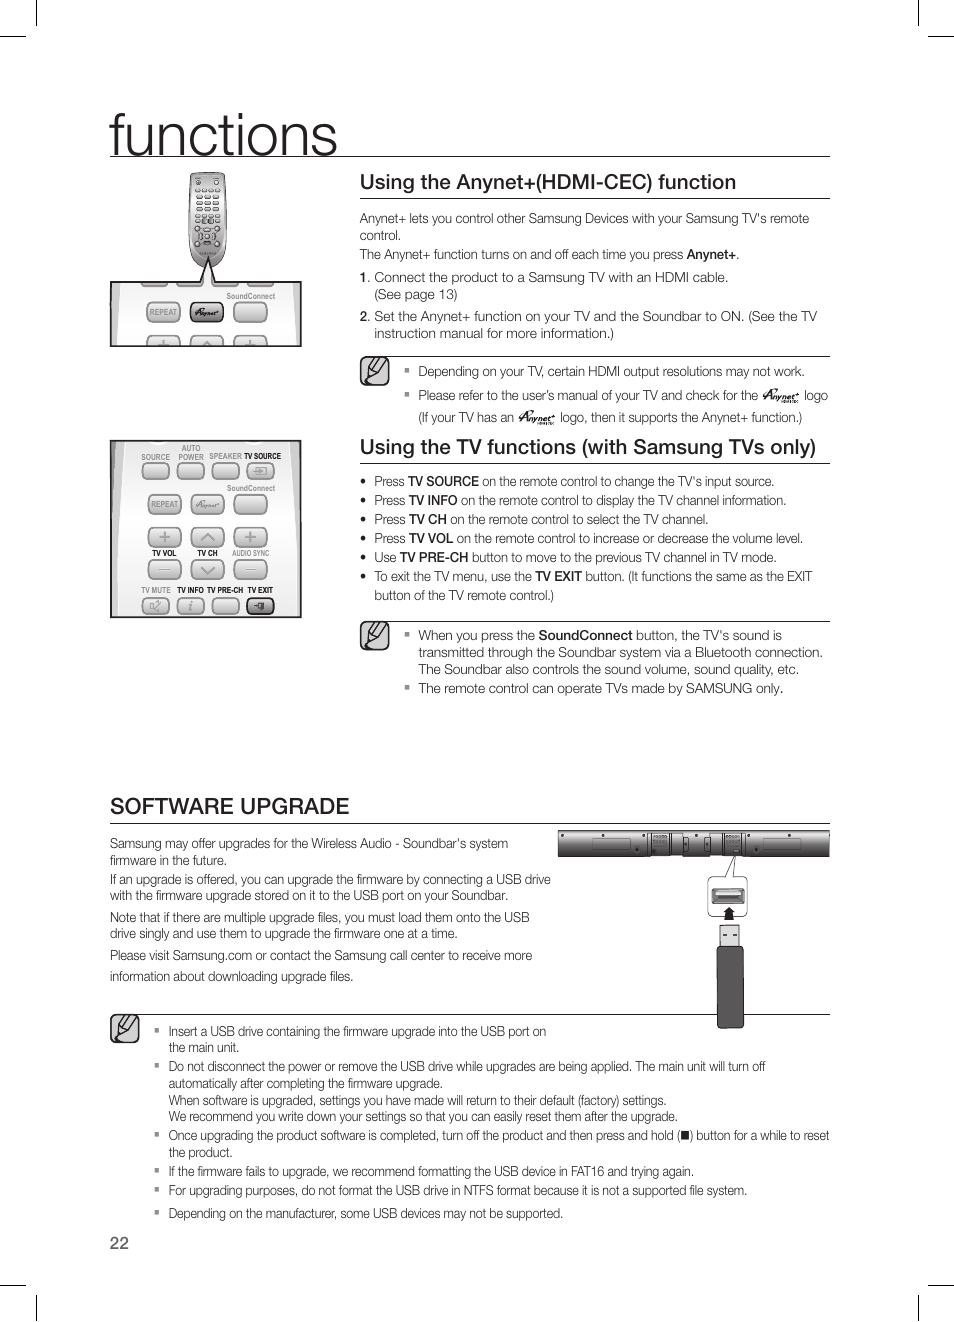 Software upgrade, Functions, Using the anynet+(hdmi-cec) function | Samsung  HW-H550-ZA User Manual | Page 22 / 26 | Original mode